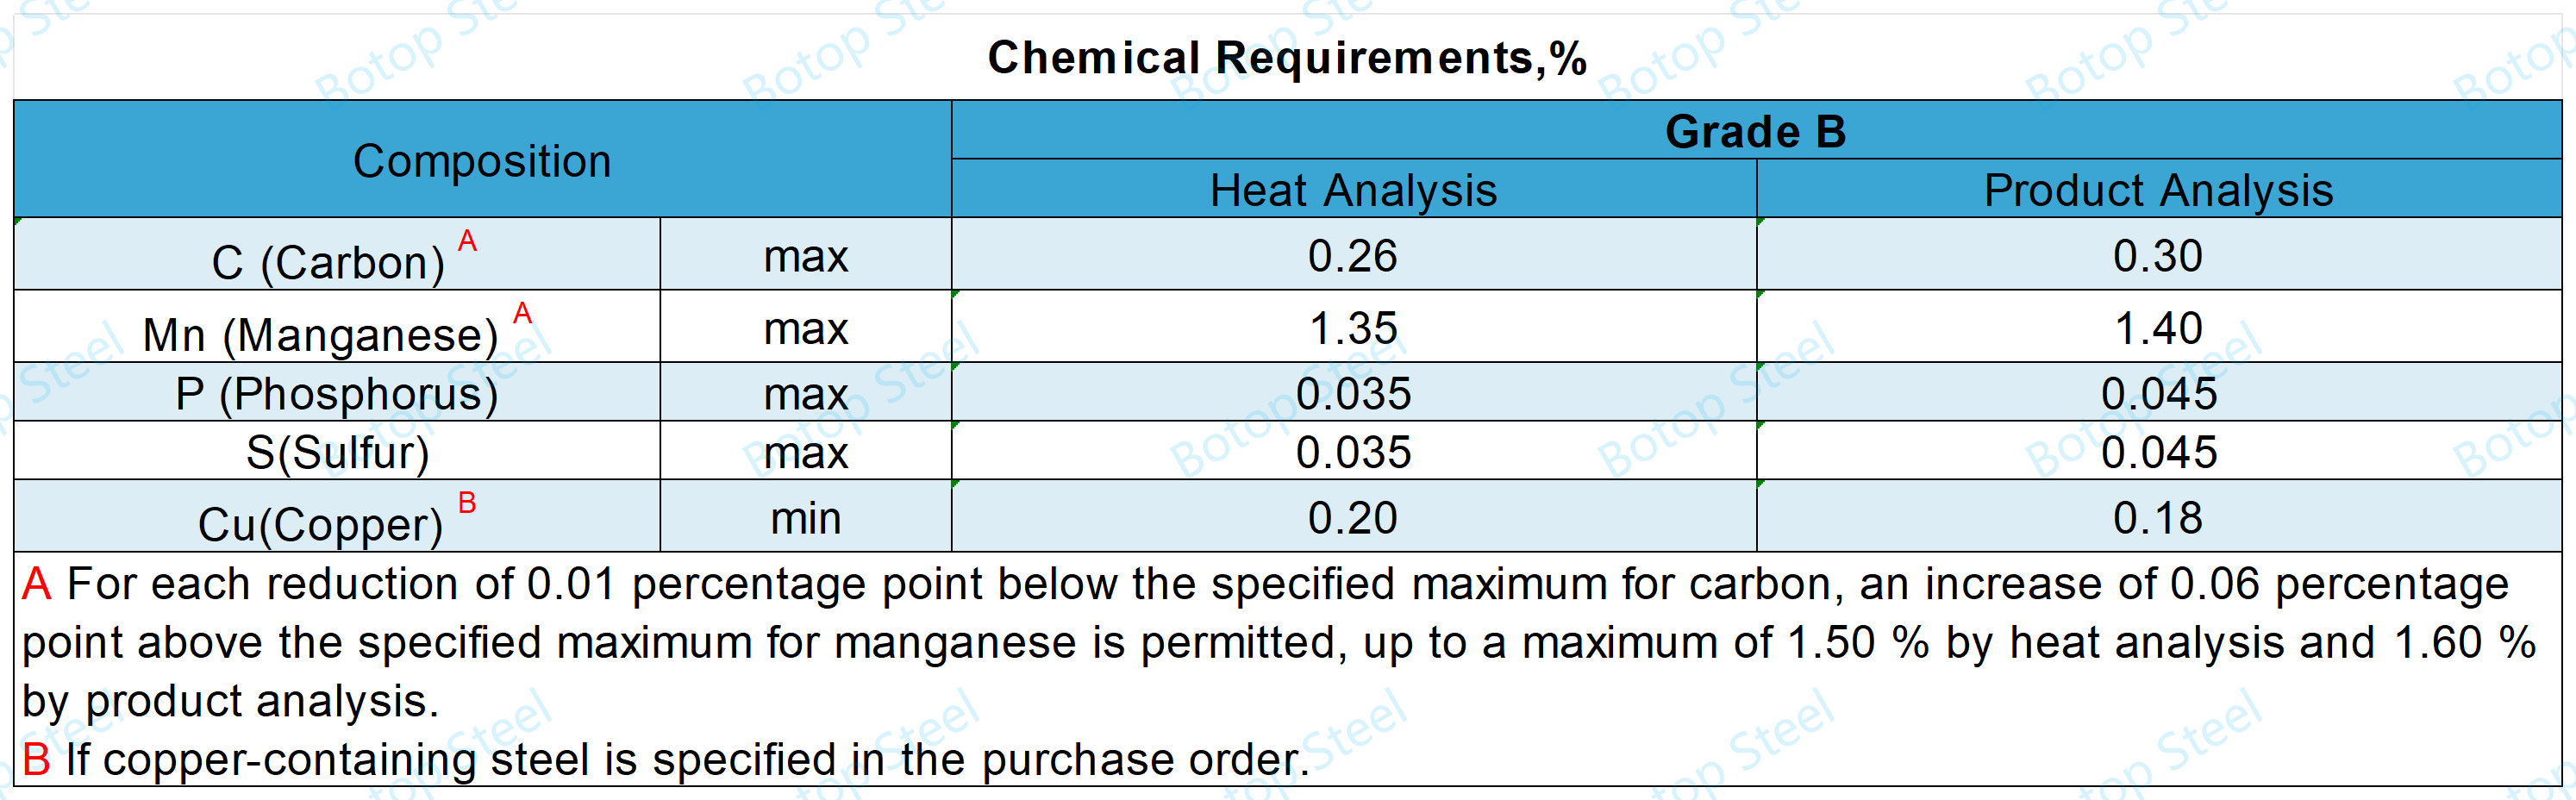 ASTM A500 Grade B_Chemical Requirements